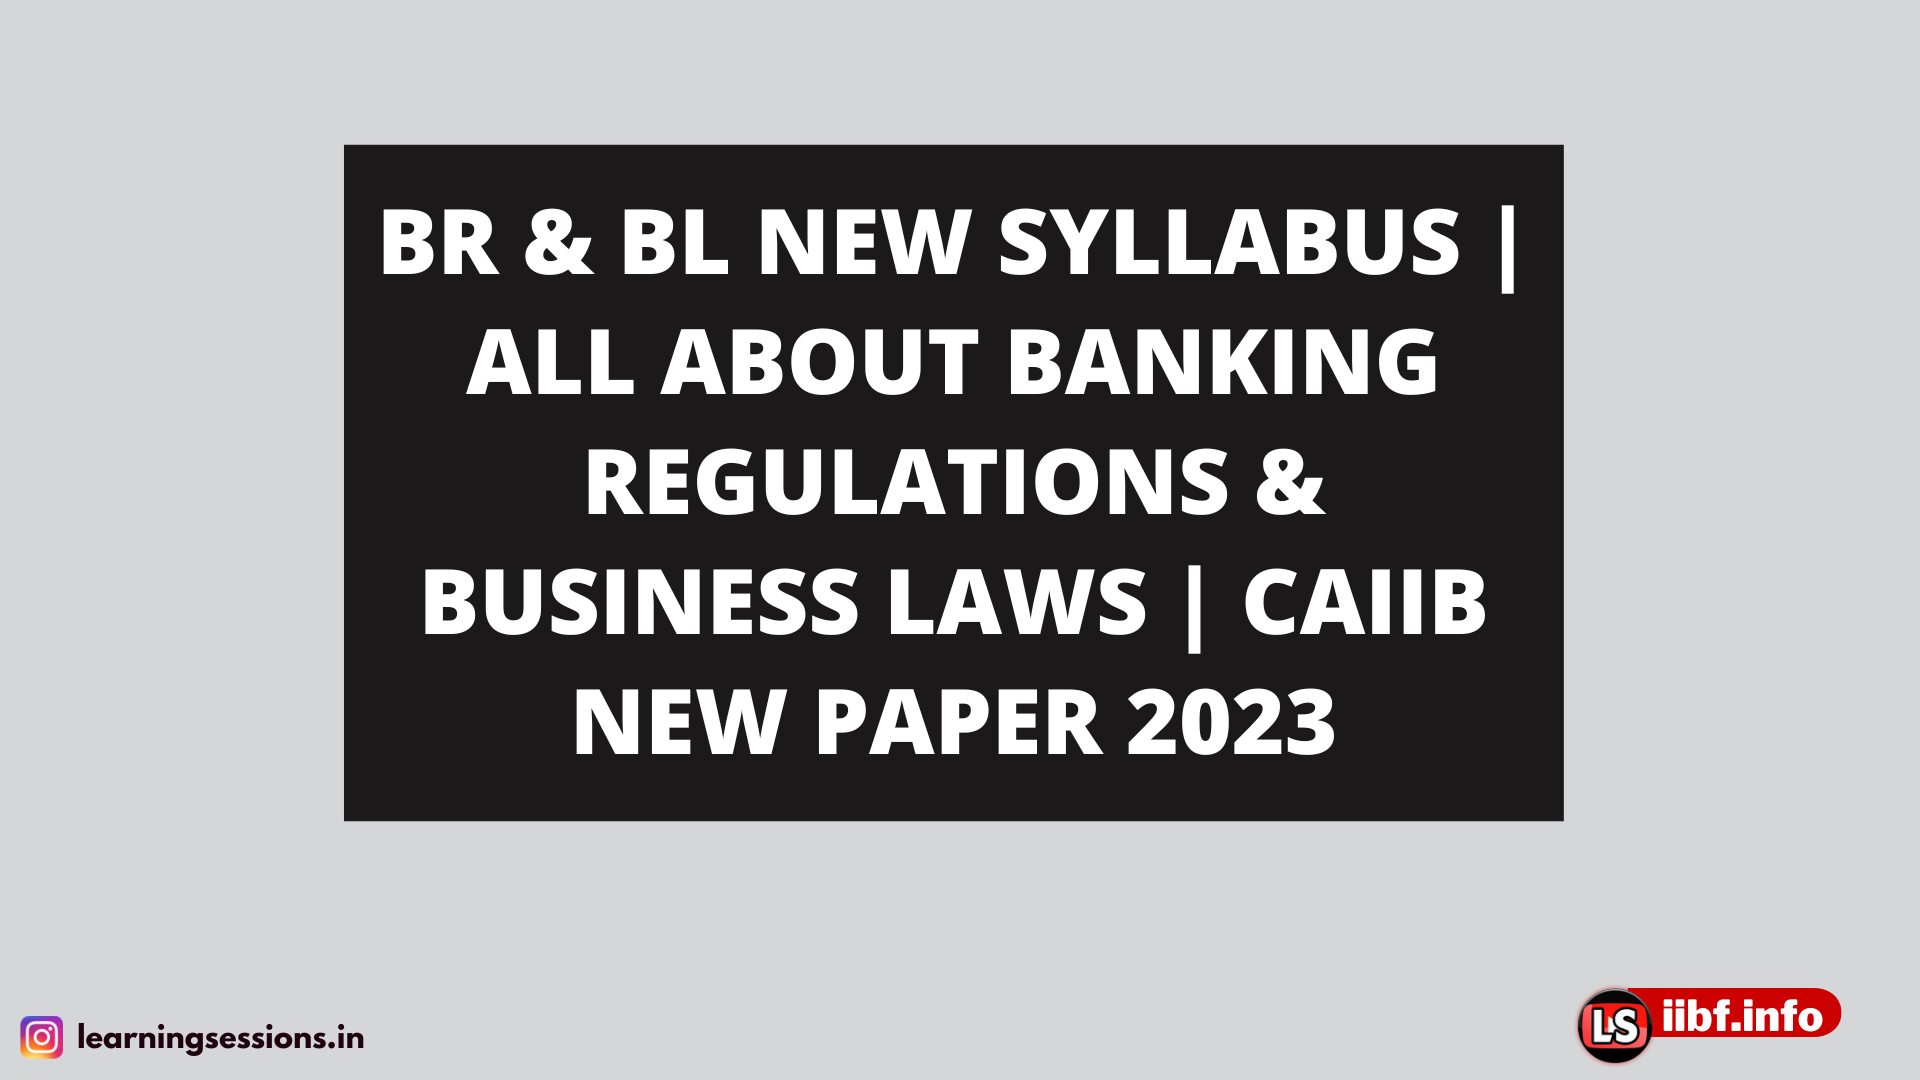 BR & BL NEW SYLLABUS | ALL ABOUT BANKING REGULATIONS & BUSINESS LAWS | CAIIB NEW PAPER 2023